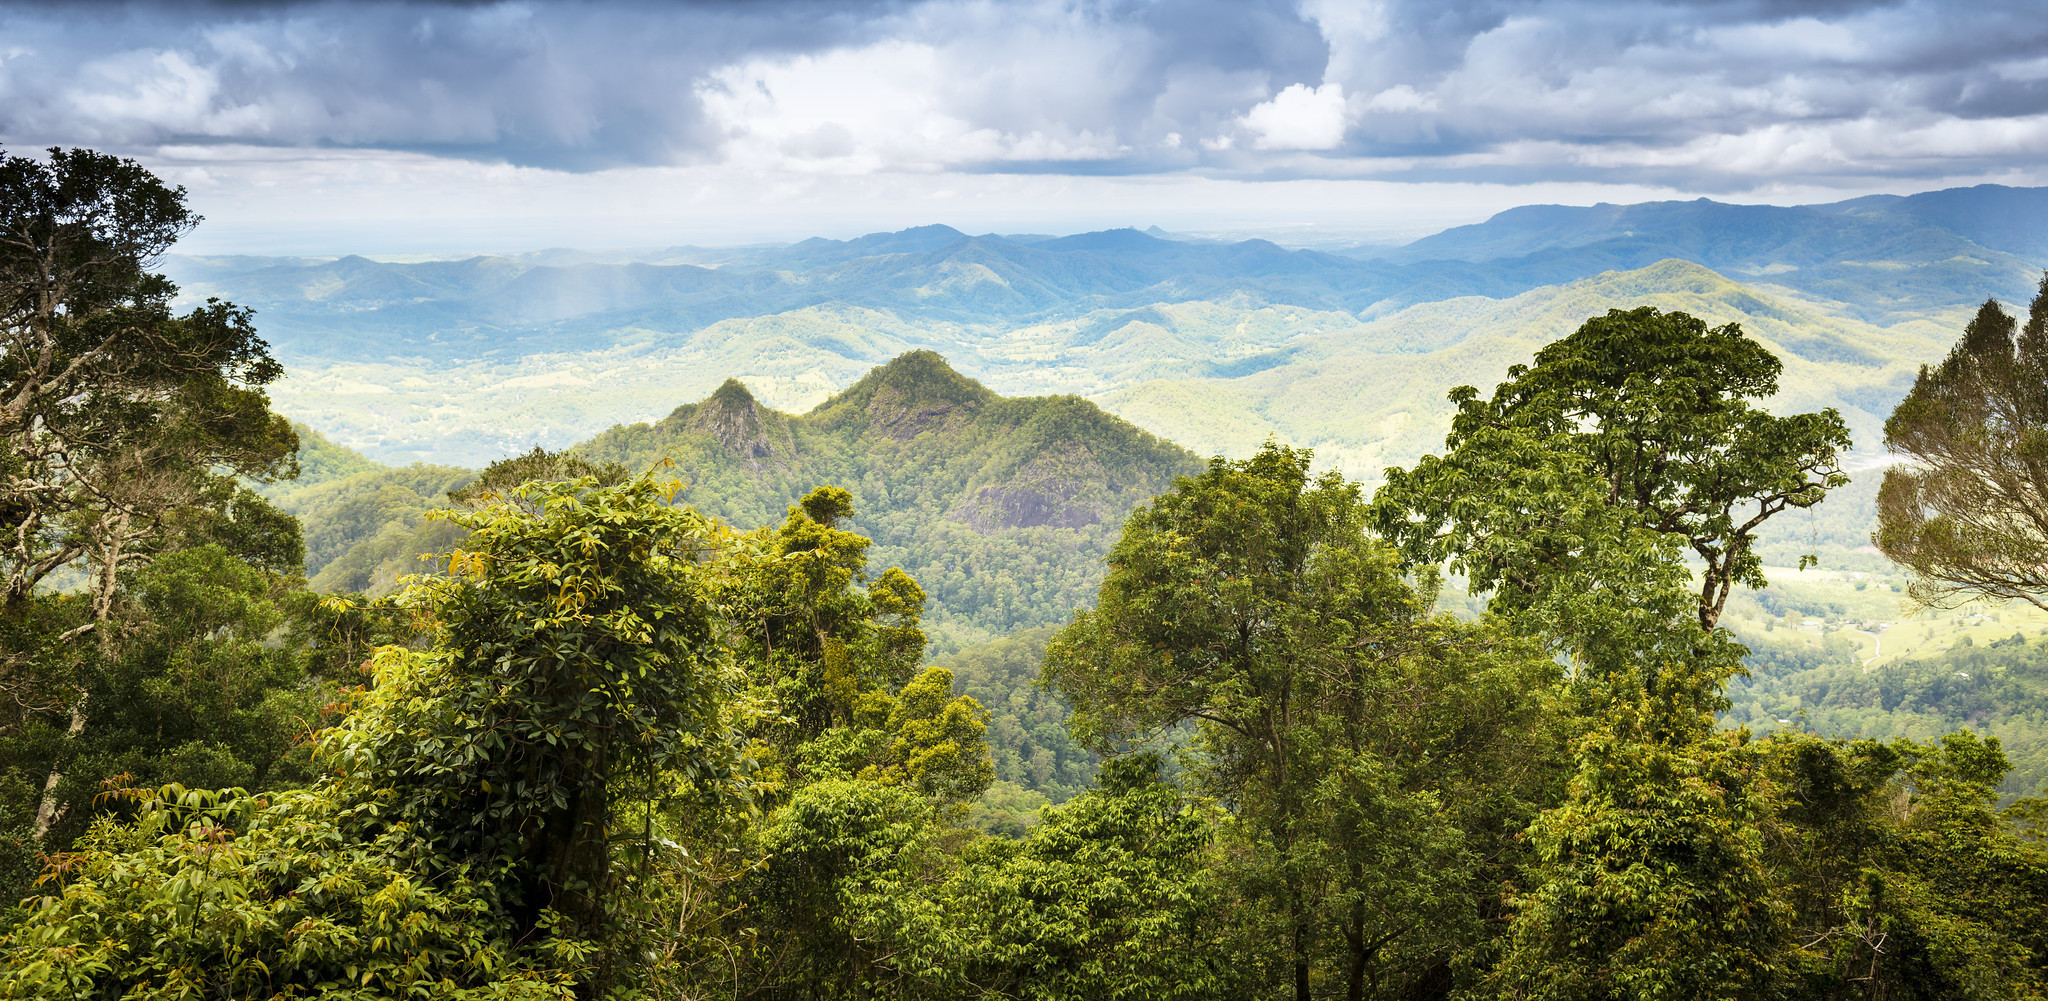 Regrown Tropical Forests May Have Short Lifespans, Says New Study – State  of the Planet